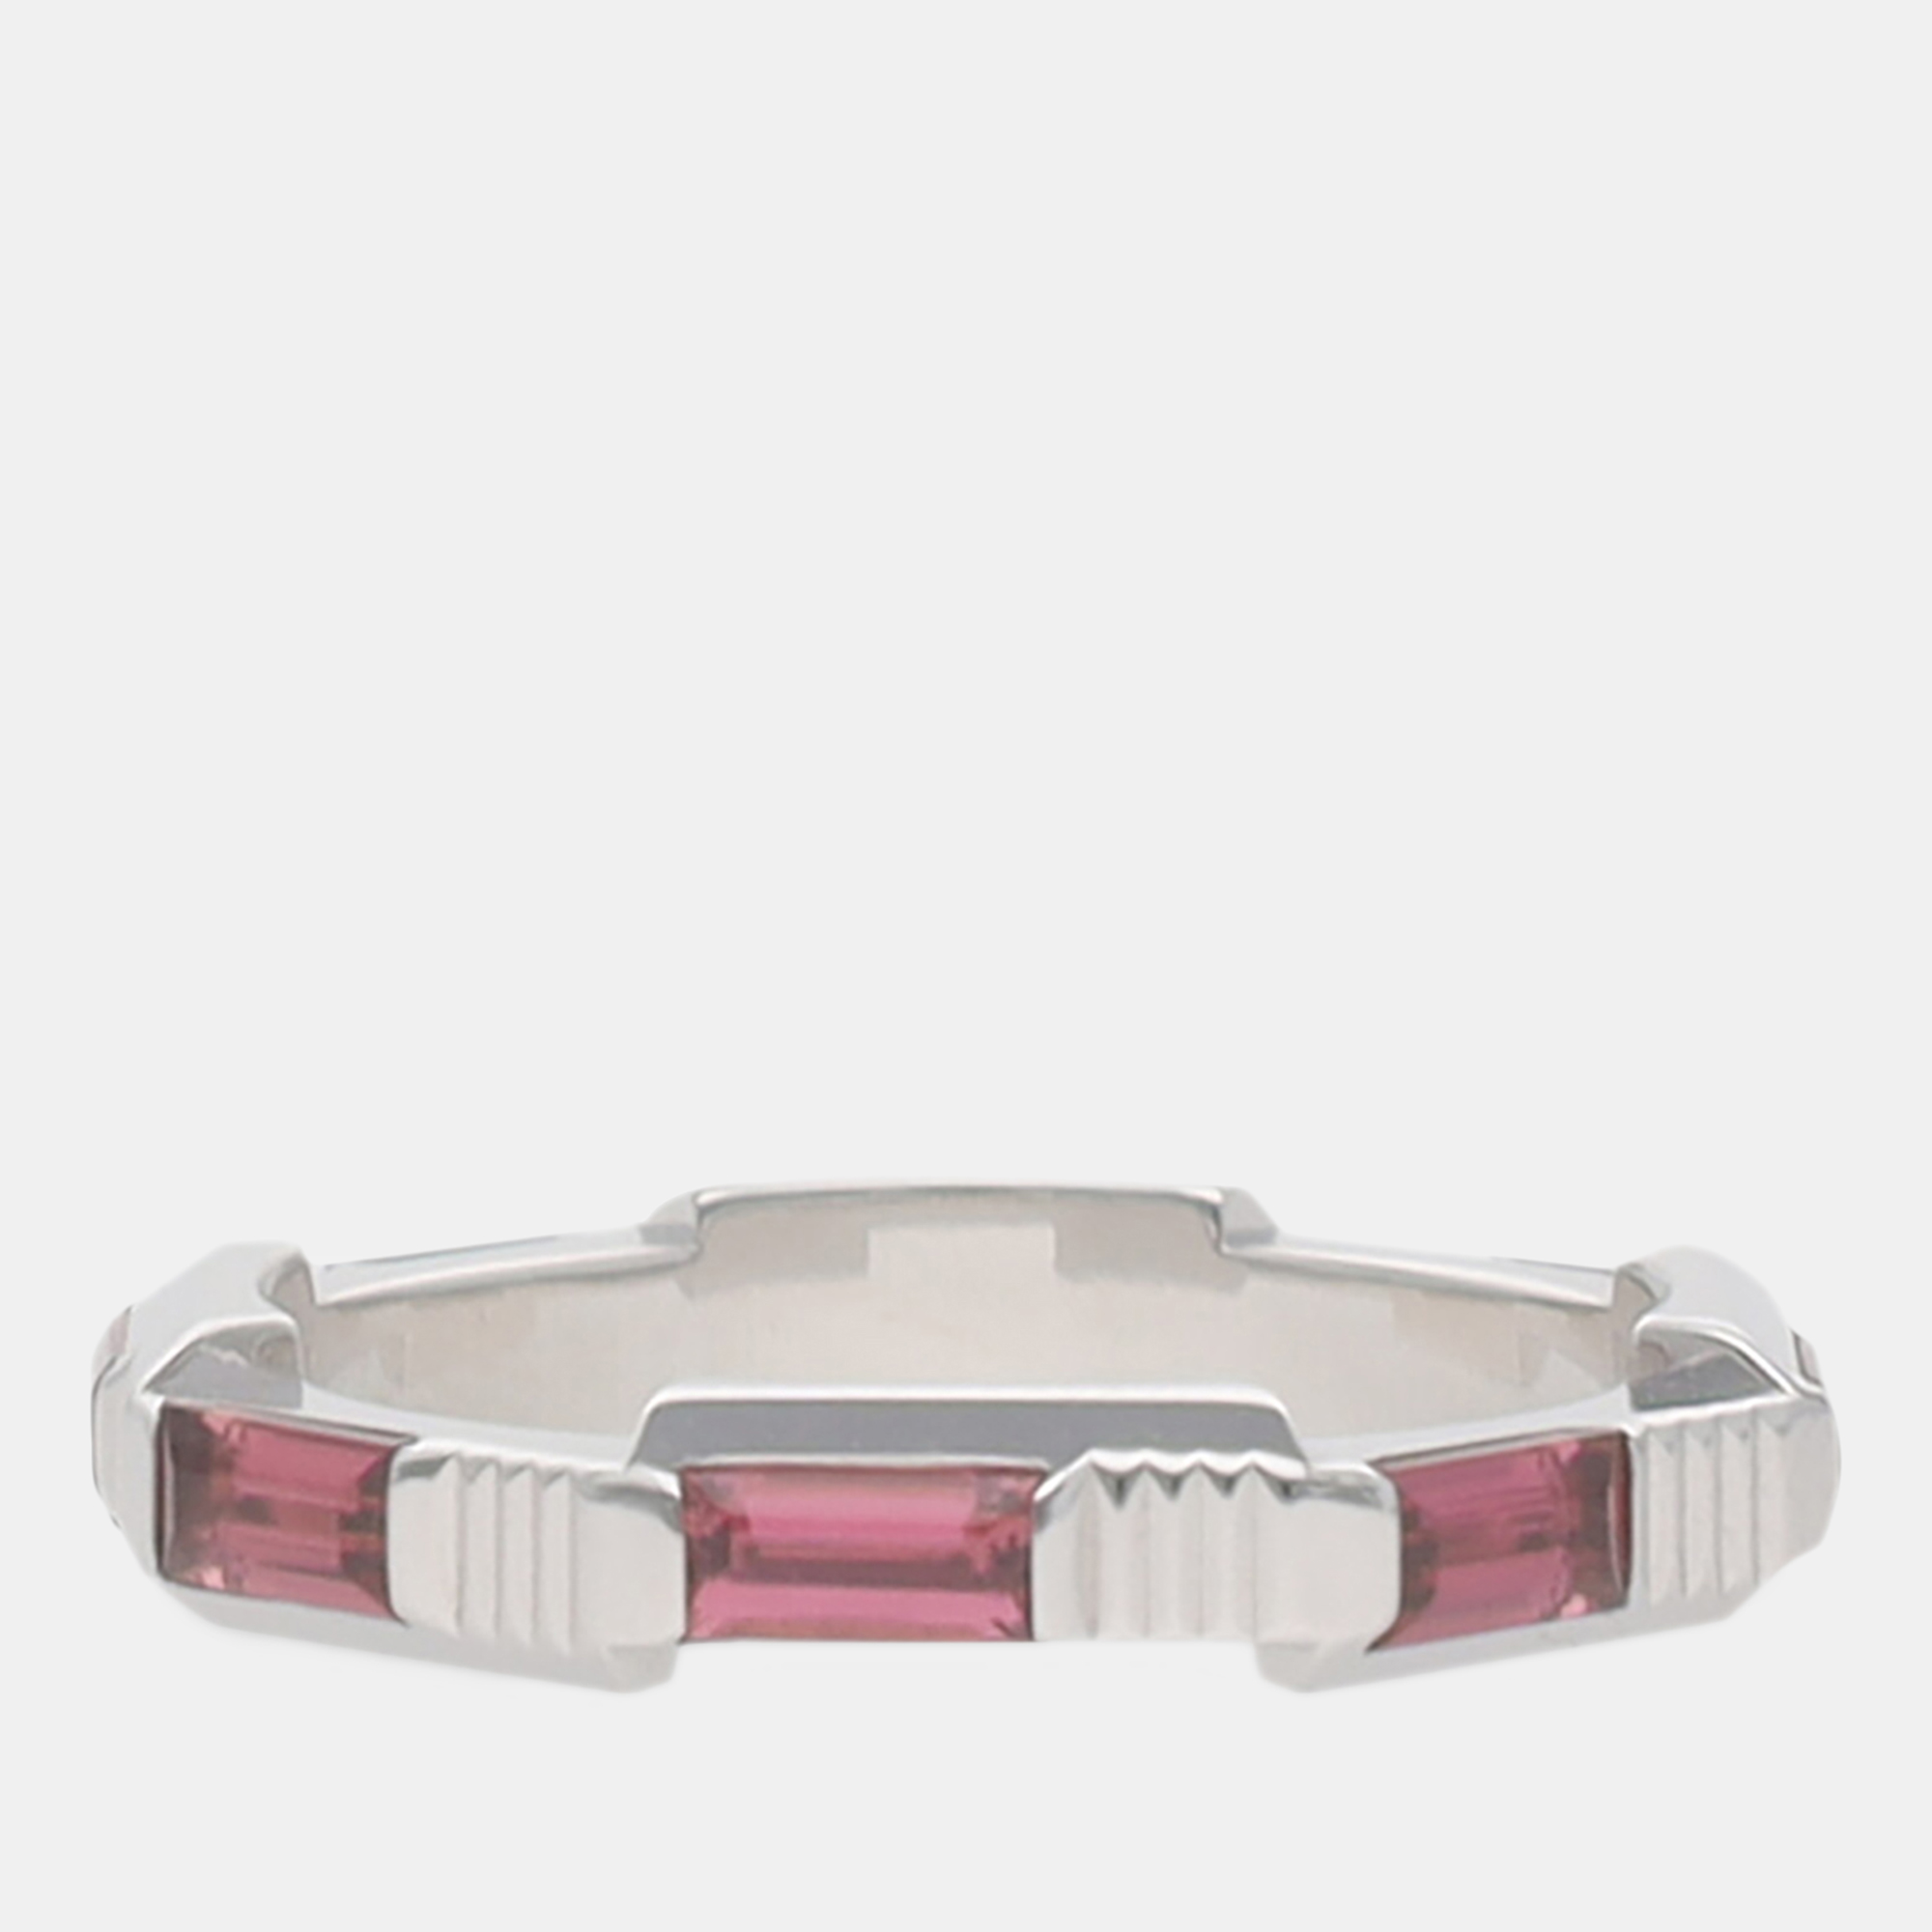 Gucci  Women's Gemstones Band Ring - Silver - One Size